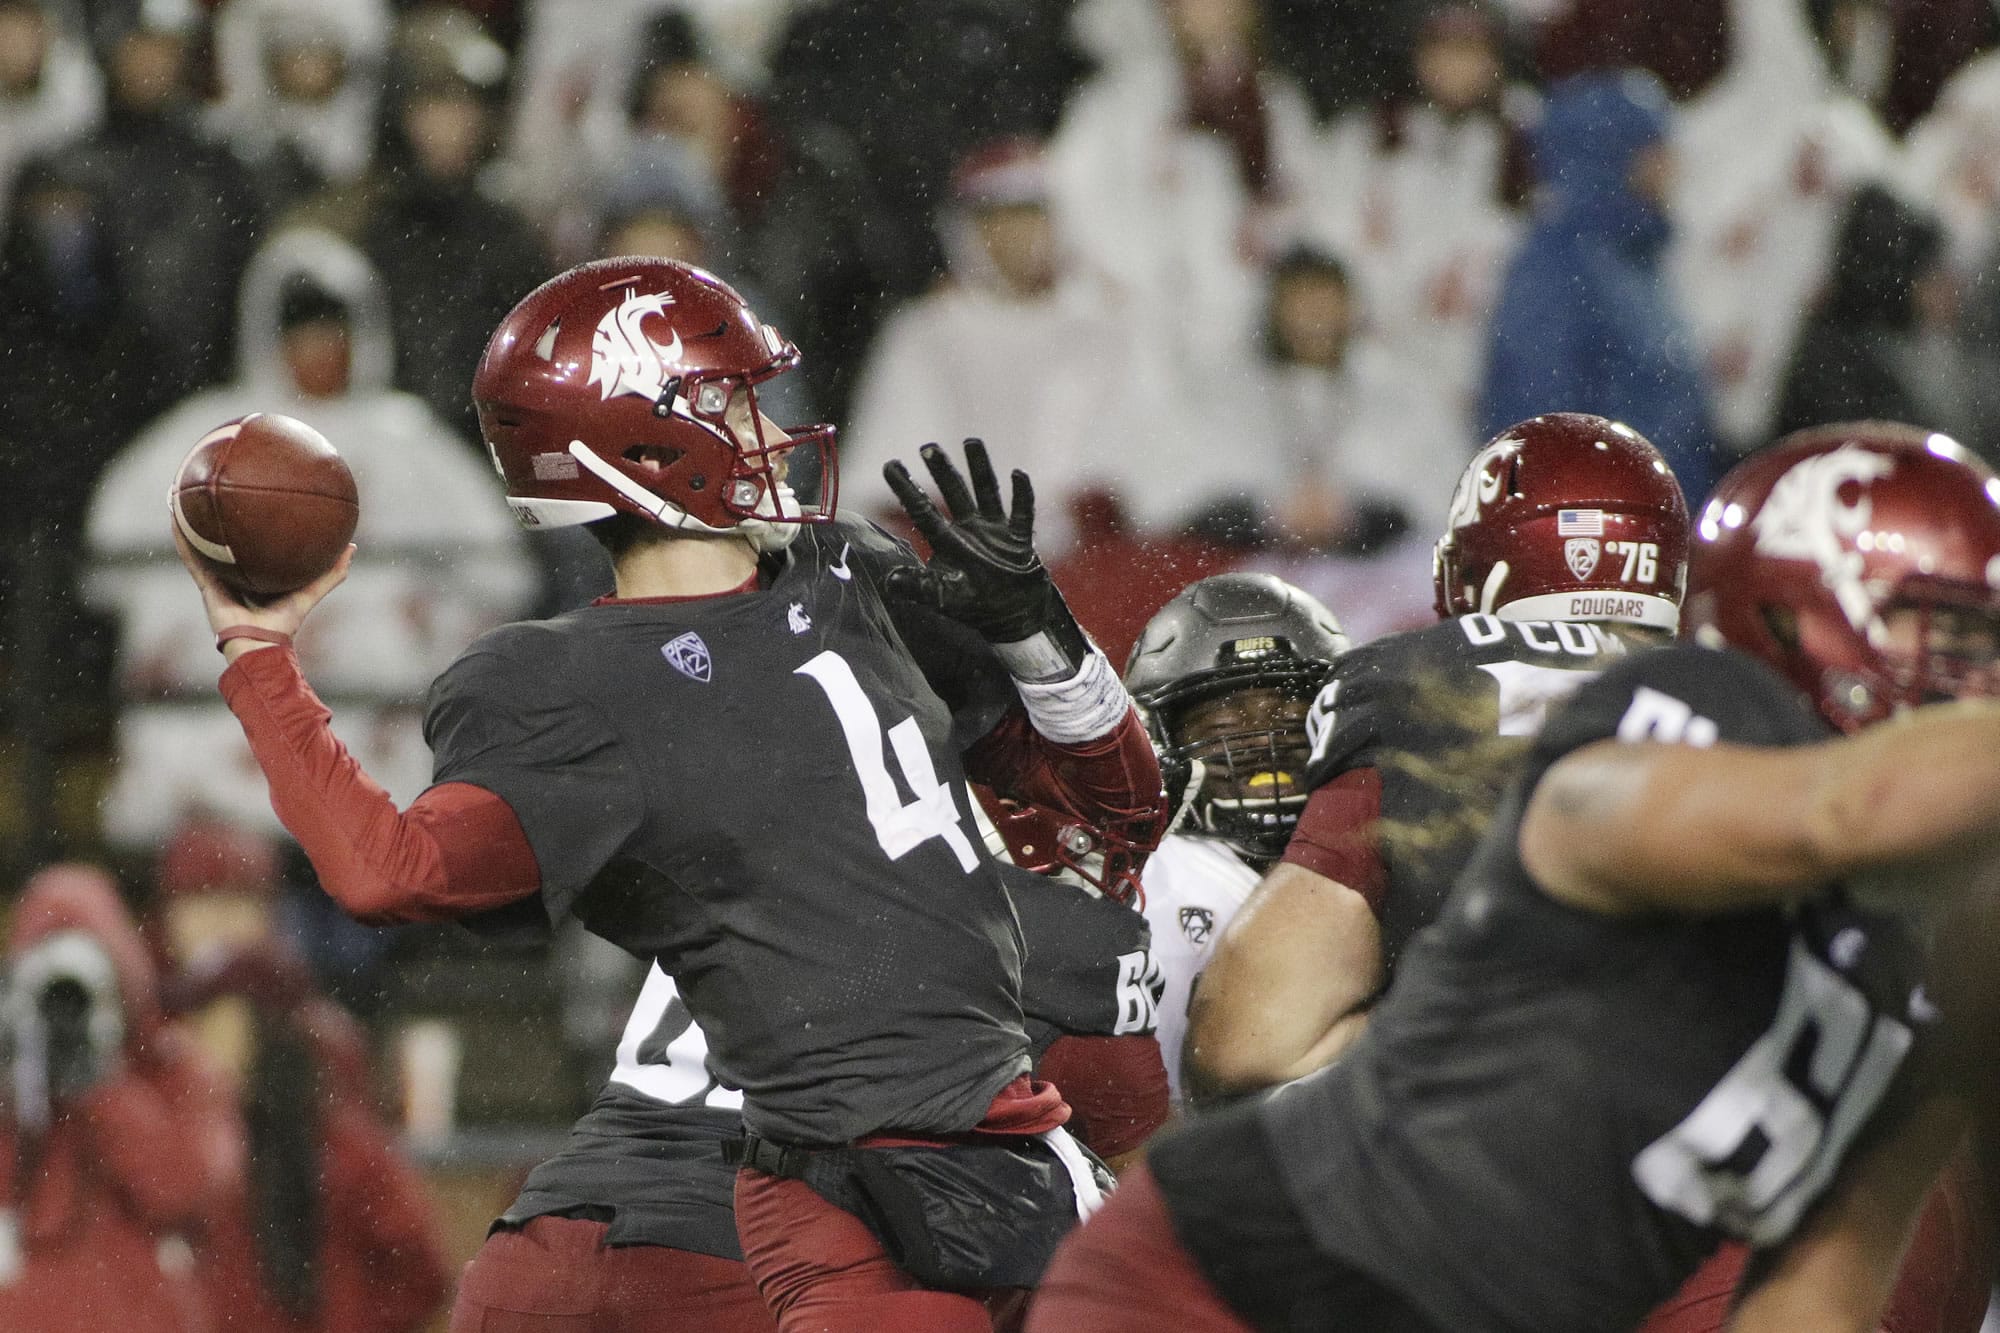 Washington State quarterback Luke Falk (4) throws a pass during the first half of an NCAA college football game against Colorado in Pullman, Wash., Saturday, Oct. 21, 2017.